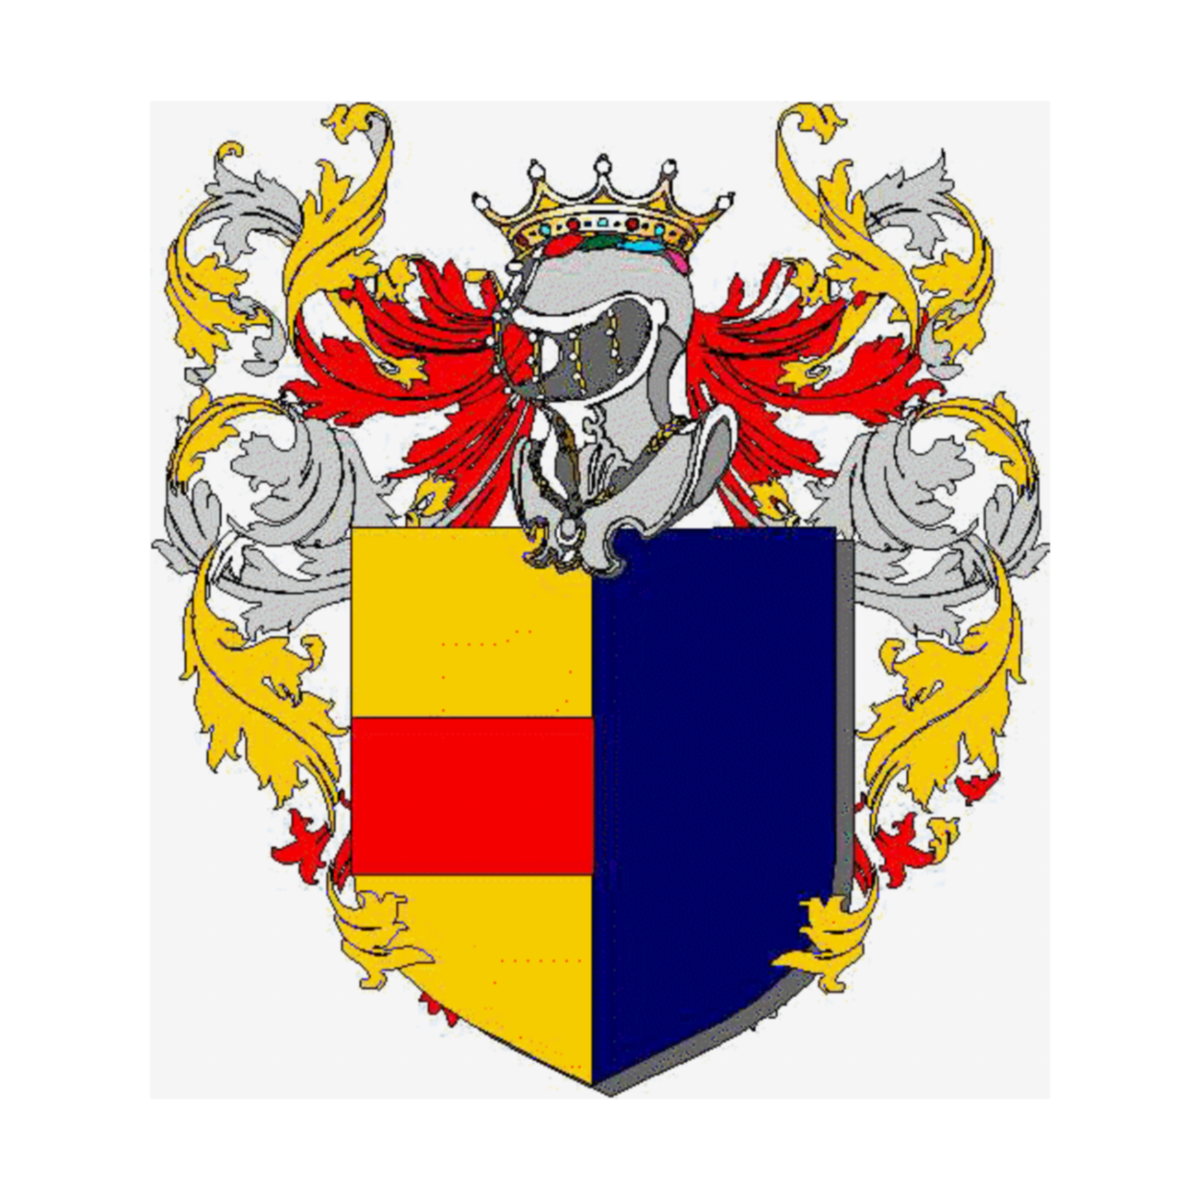 Coat of arms of family Cabello